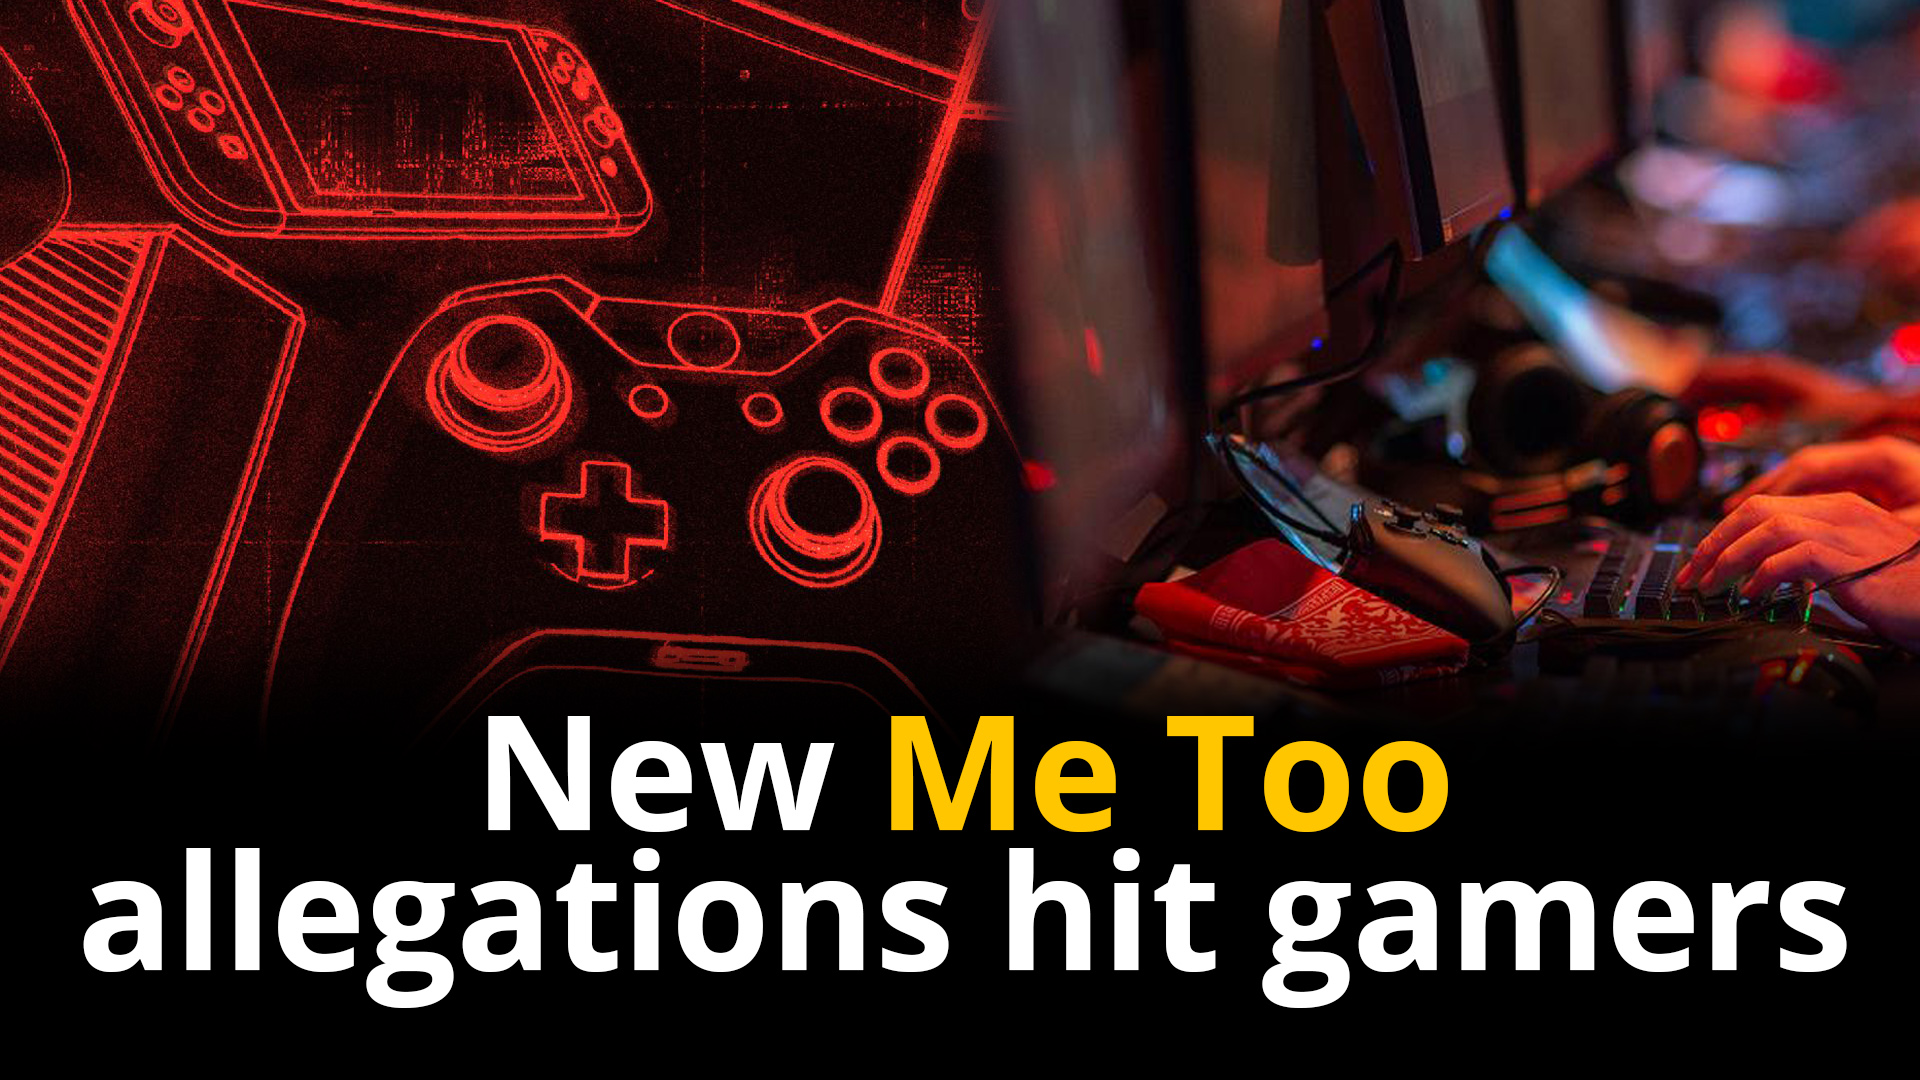 Second wave of Me Too pushes gaming companies to act